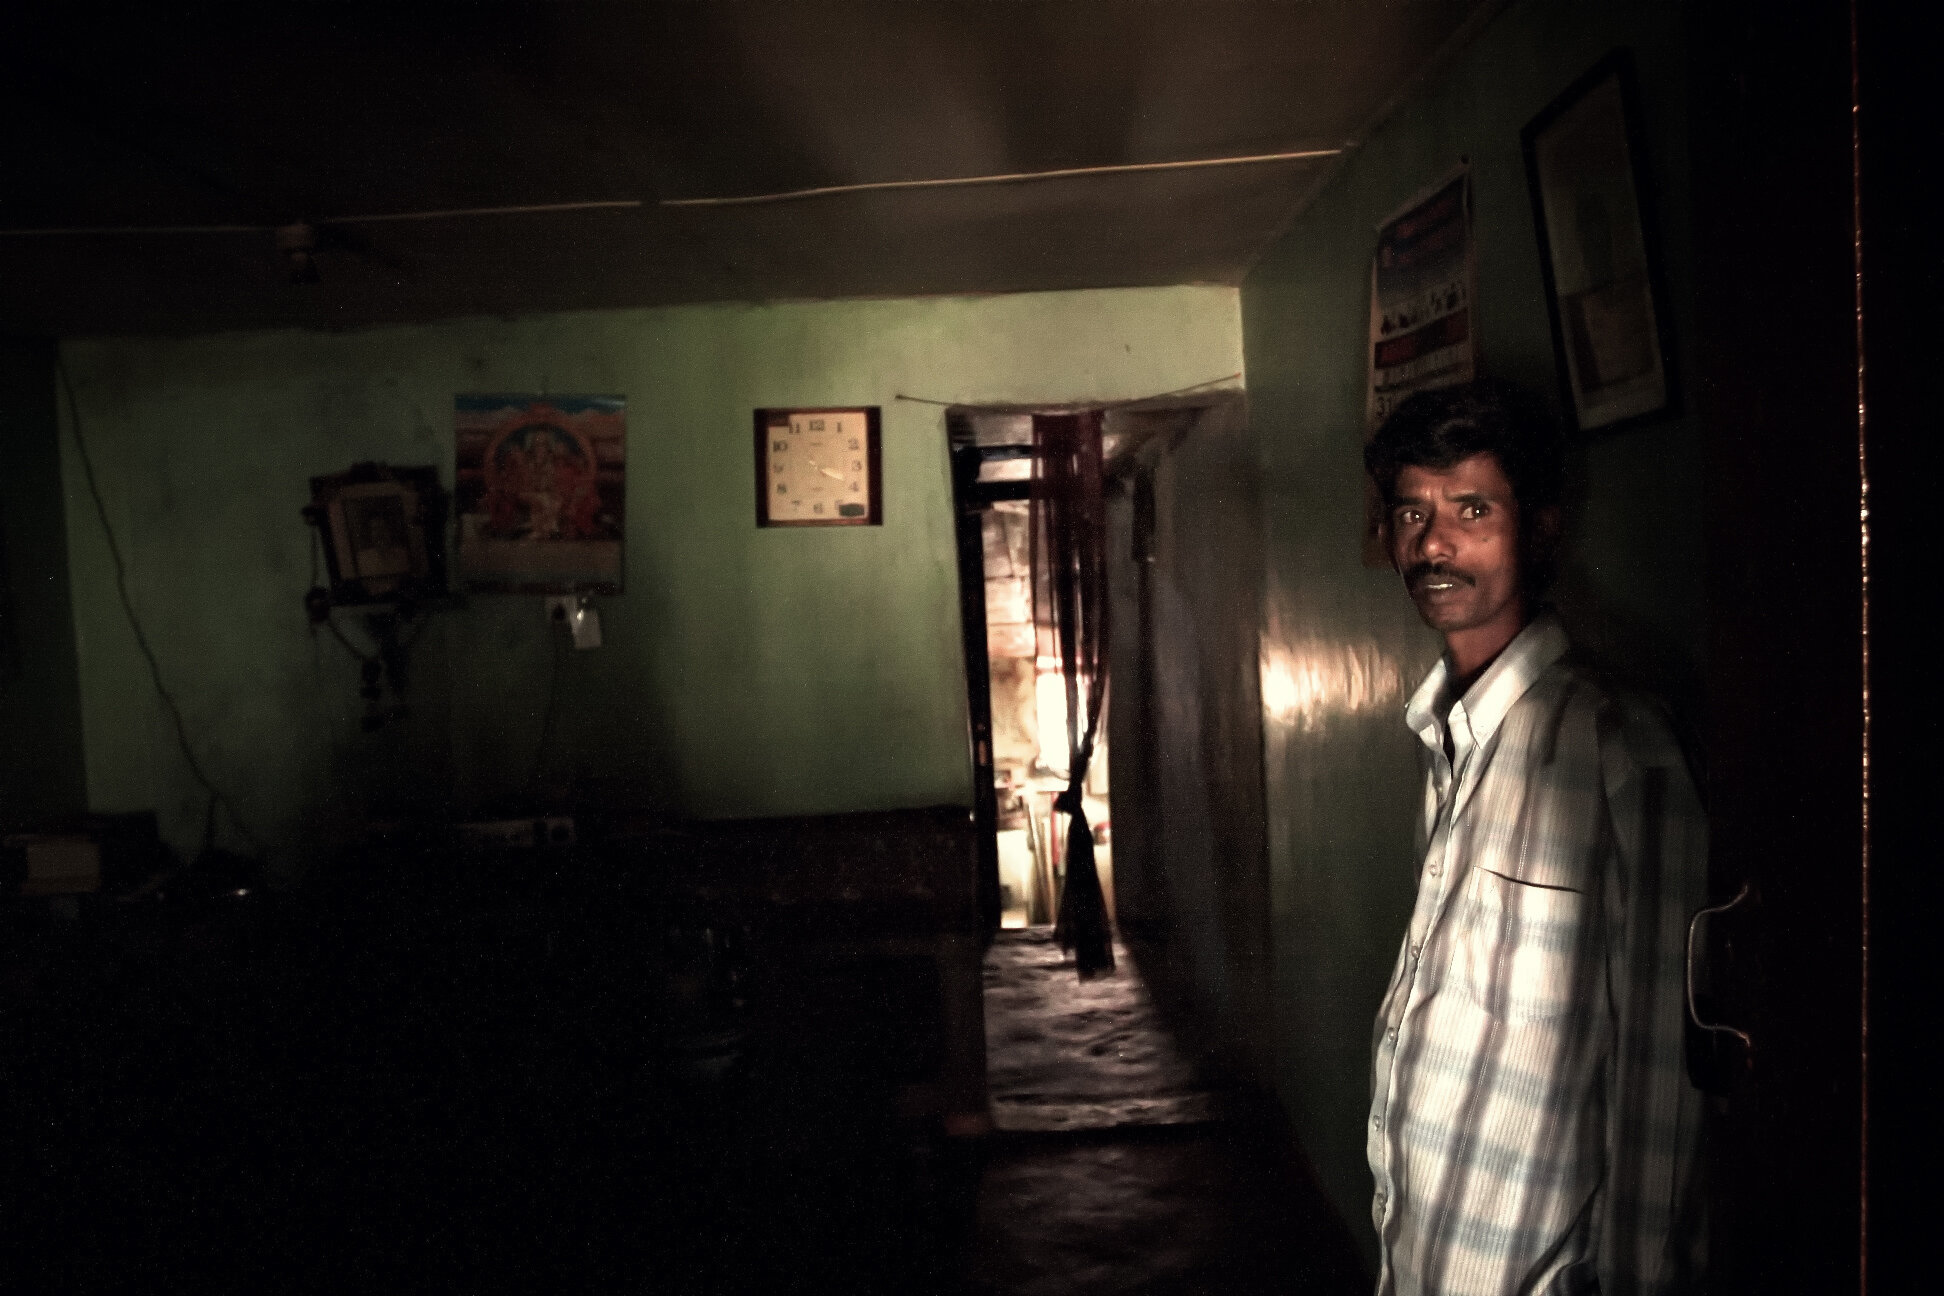  A worker at the entrance of his “line-room”- long structures divided into single rooms, one per family.   